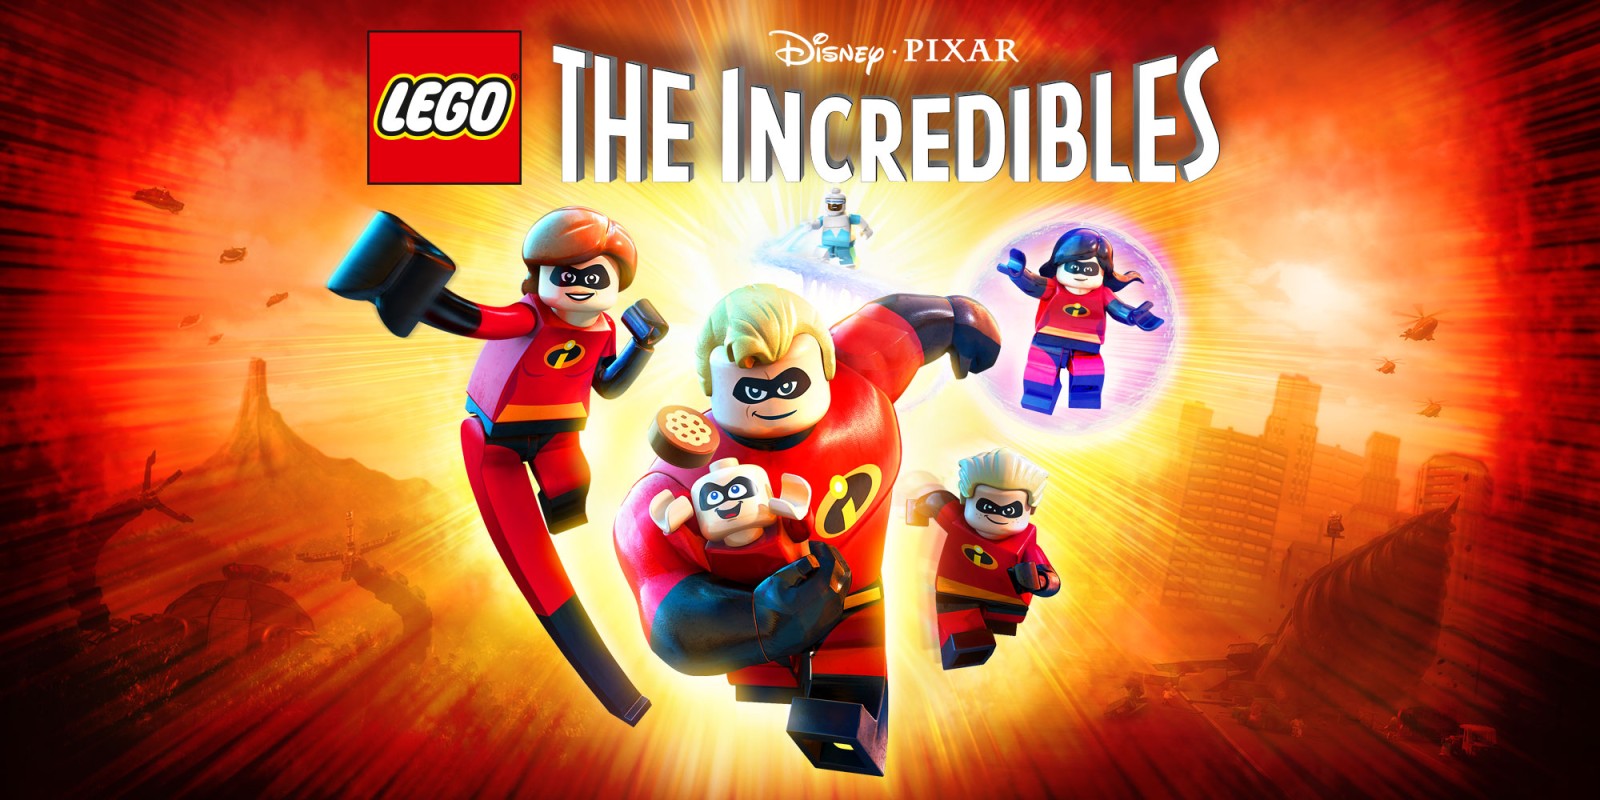 LEGO The Incredibles PC Version Free Download